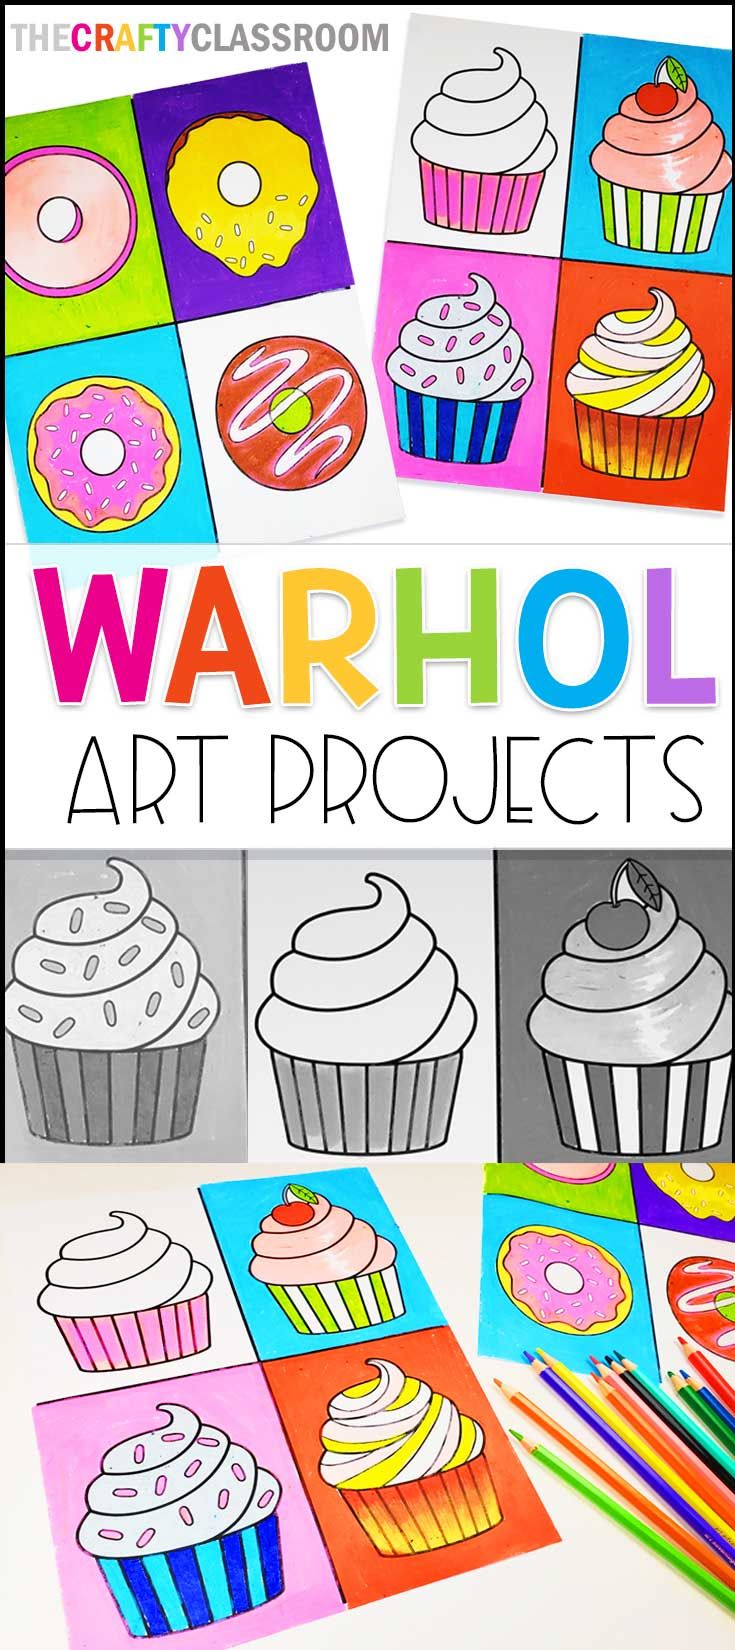 Warhol Art Projects for Kids